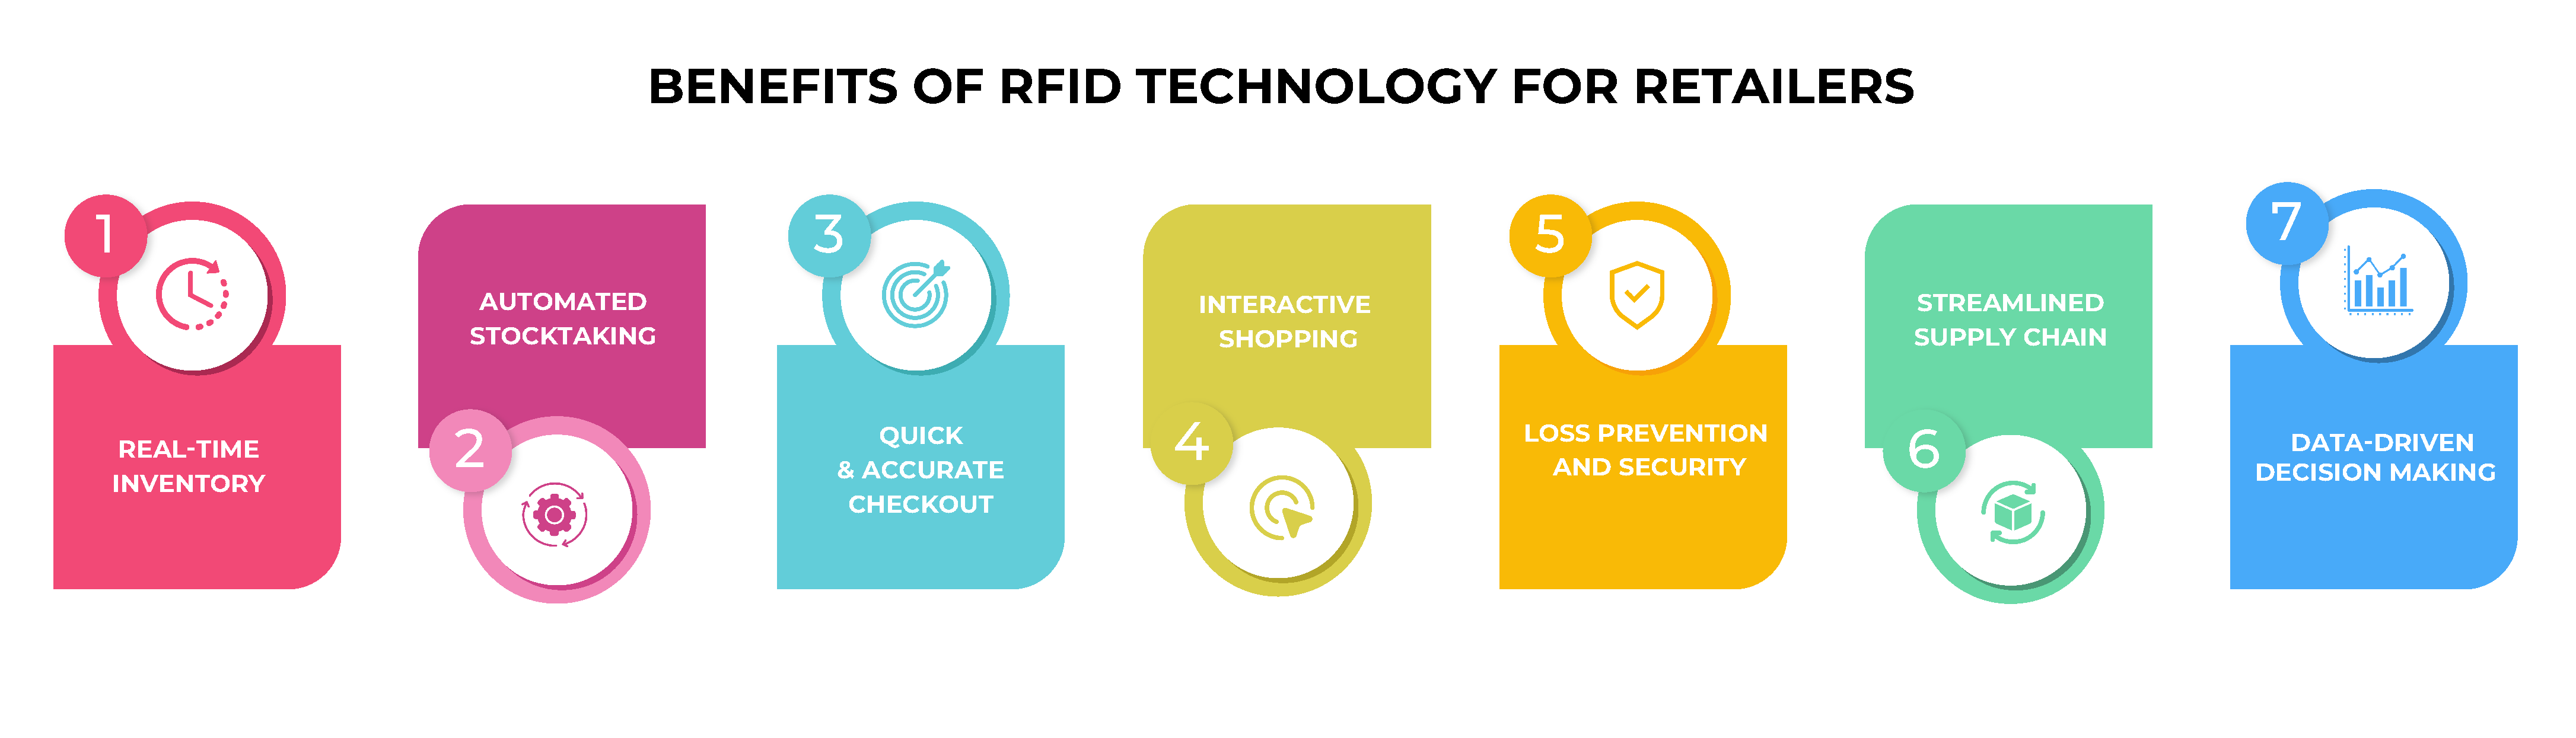 Infographic Showing Benefits of RFID Technology for Retailers